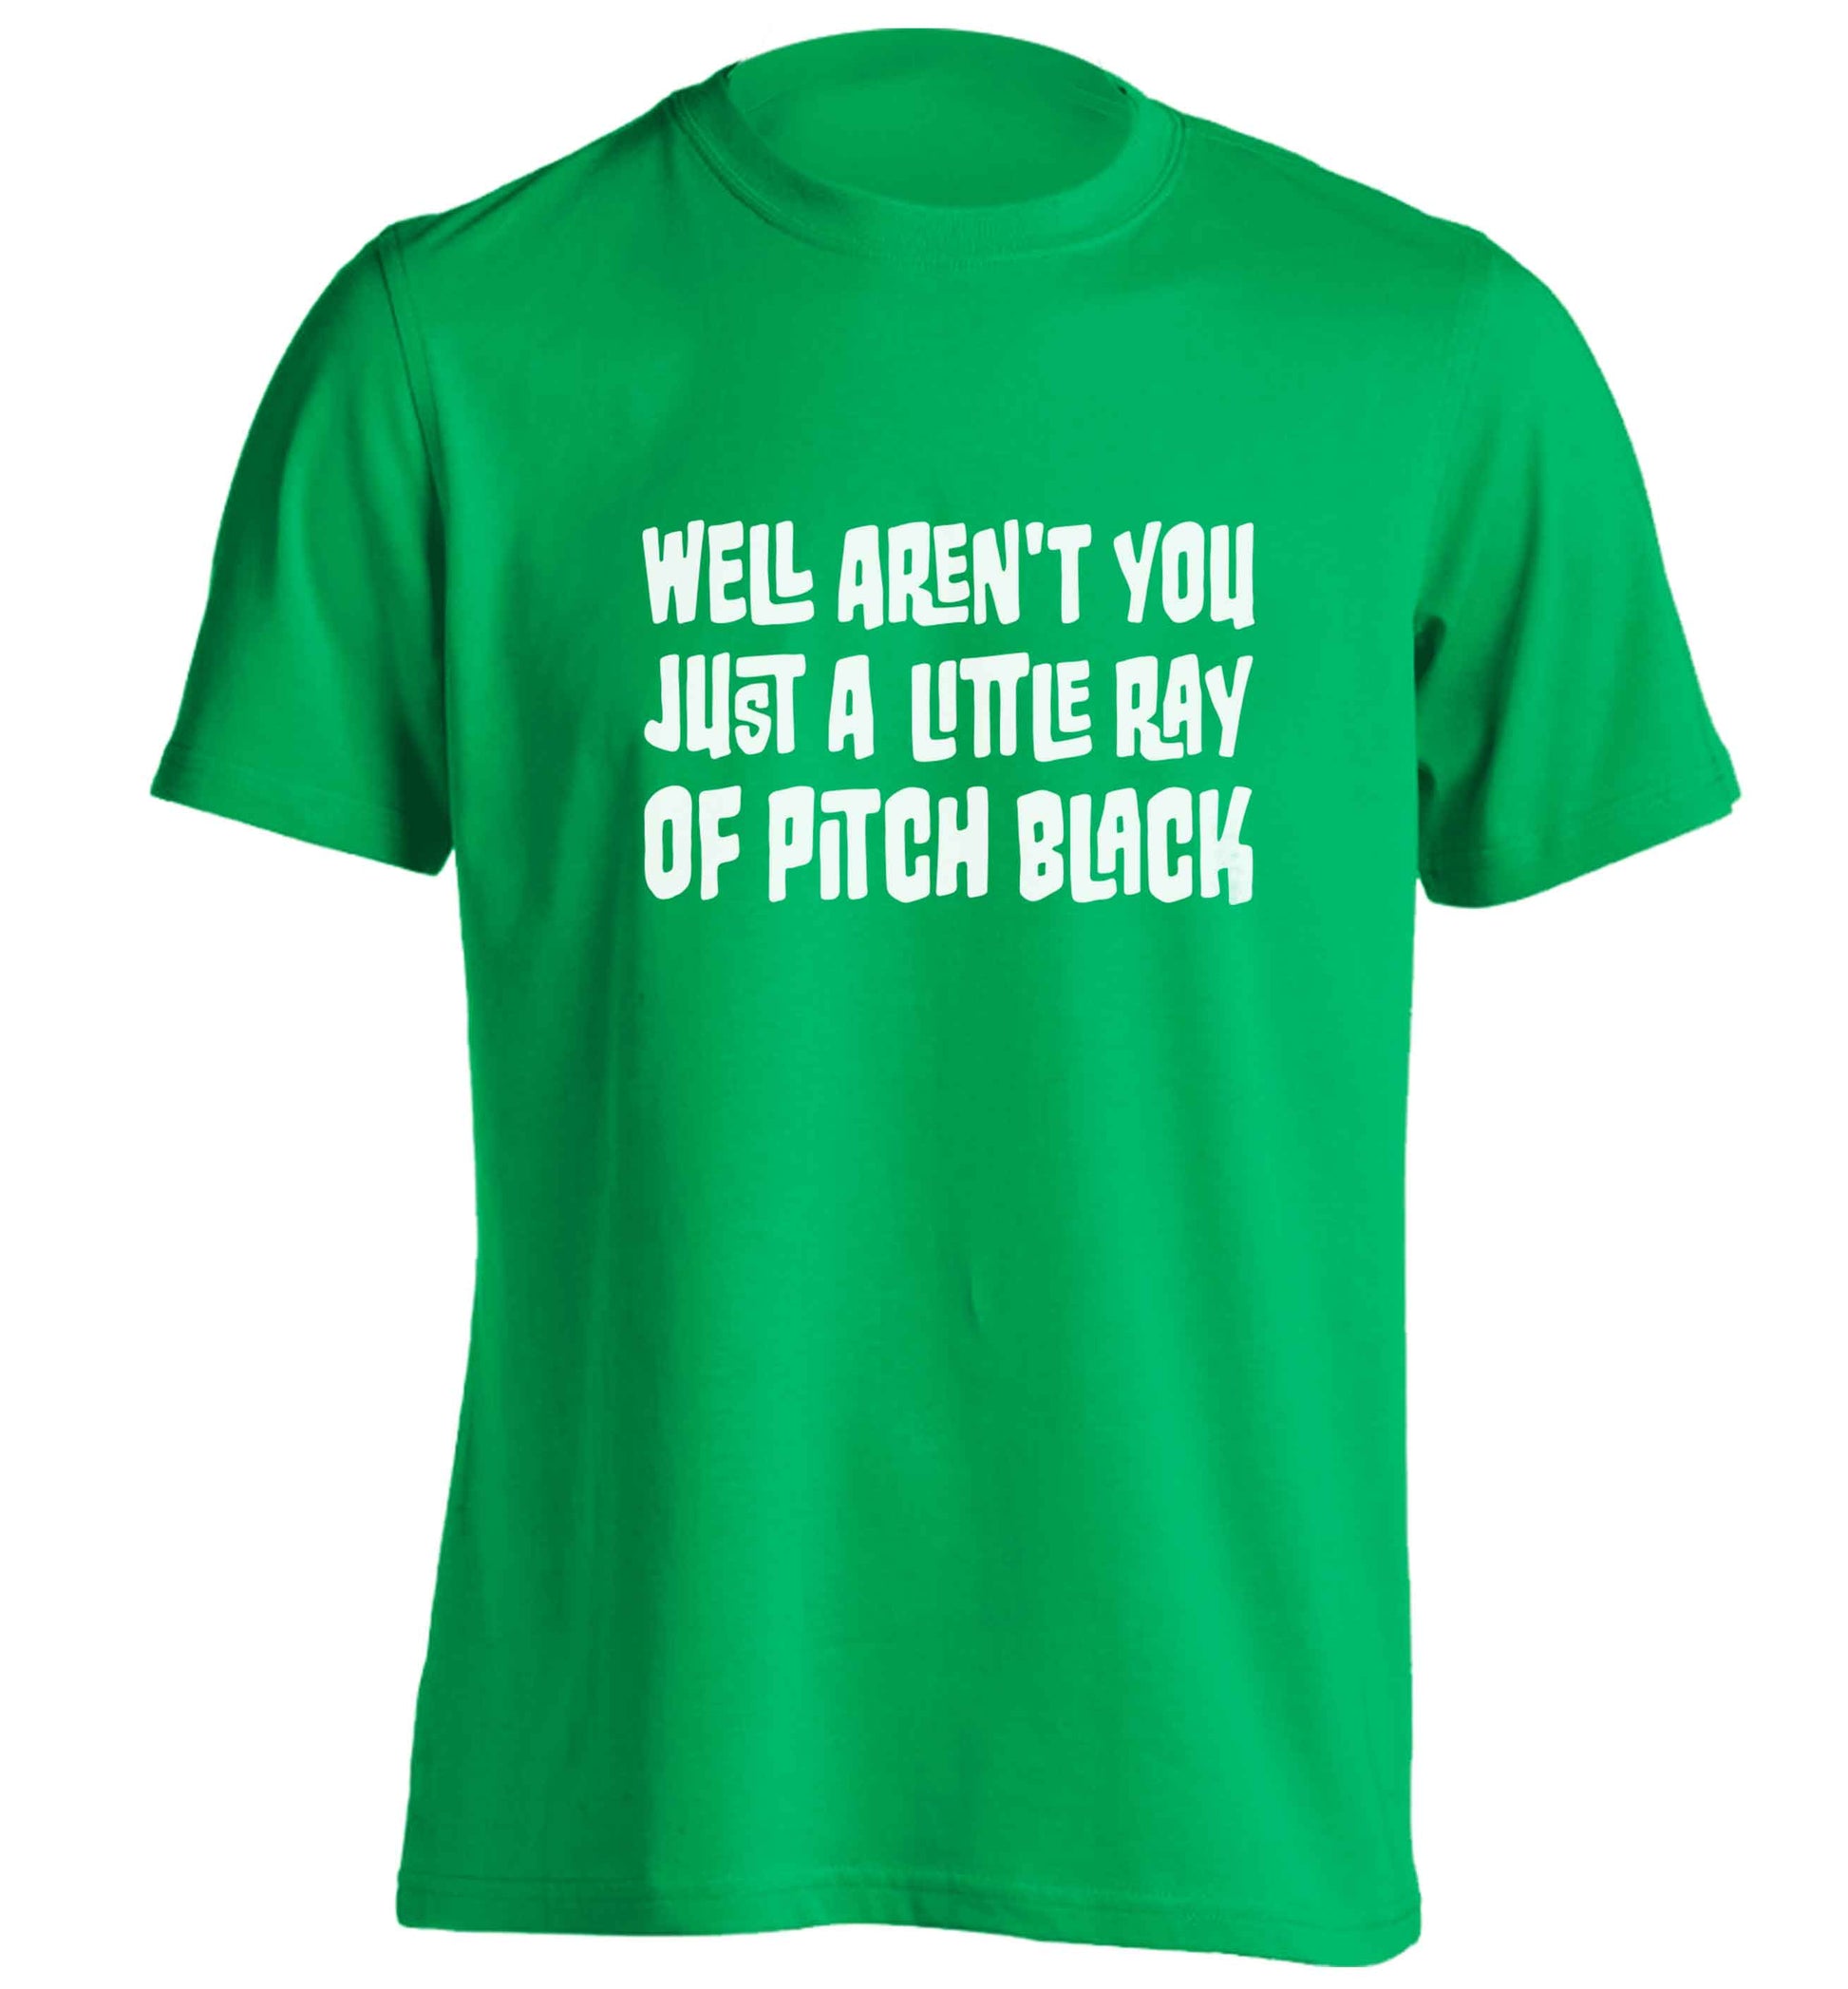 Well aren't you just a little ray of pitch black Kit adults unisex green Tshirt 2XL